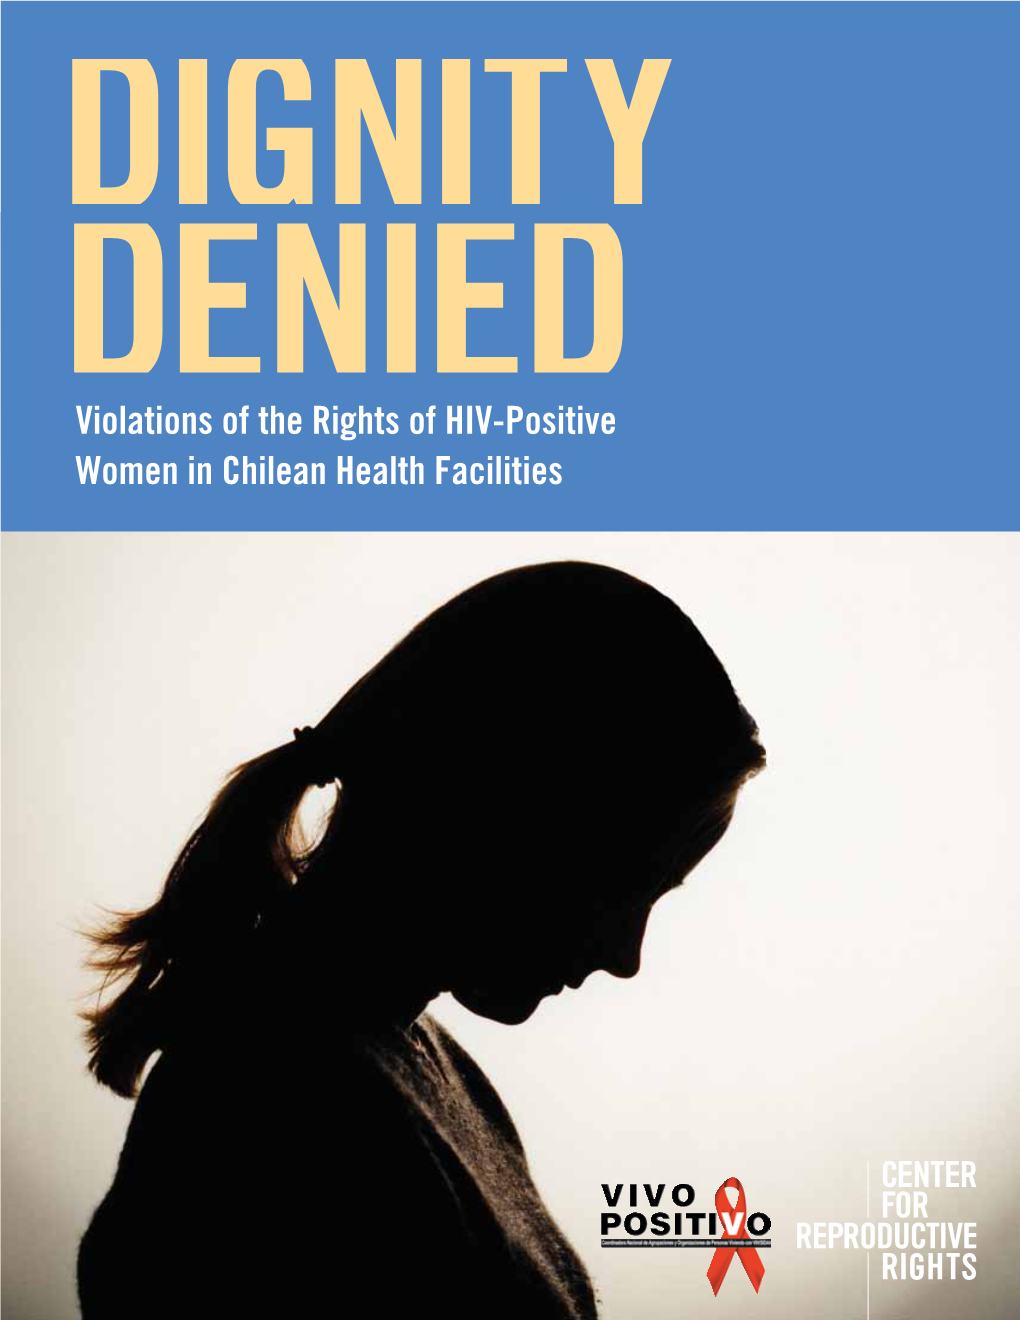 Violations of the Rights of HIV-Positive Women in Chilean Health Facilities © 2010 Center for Reproductive Rights